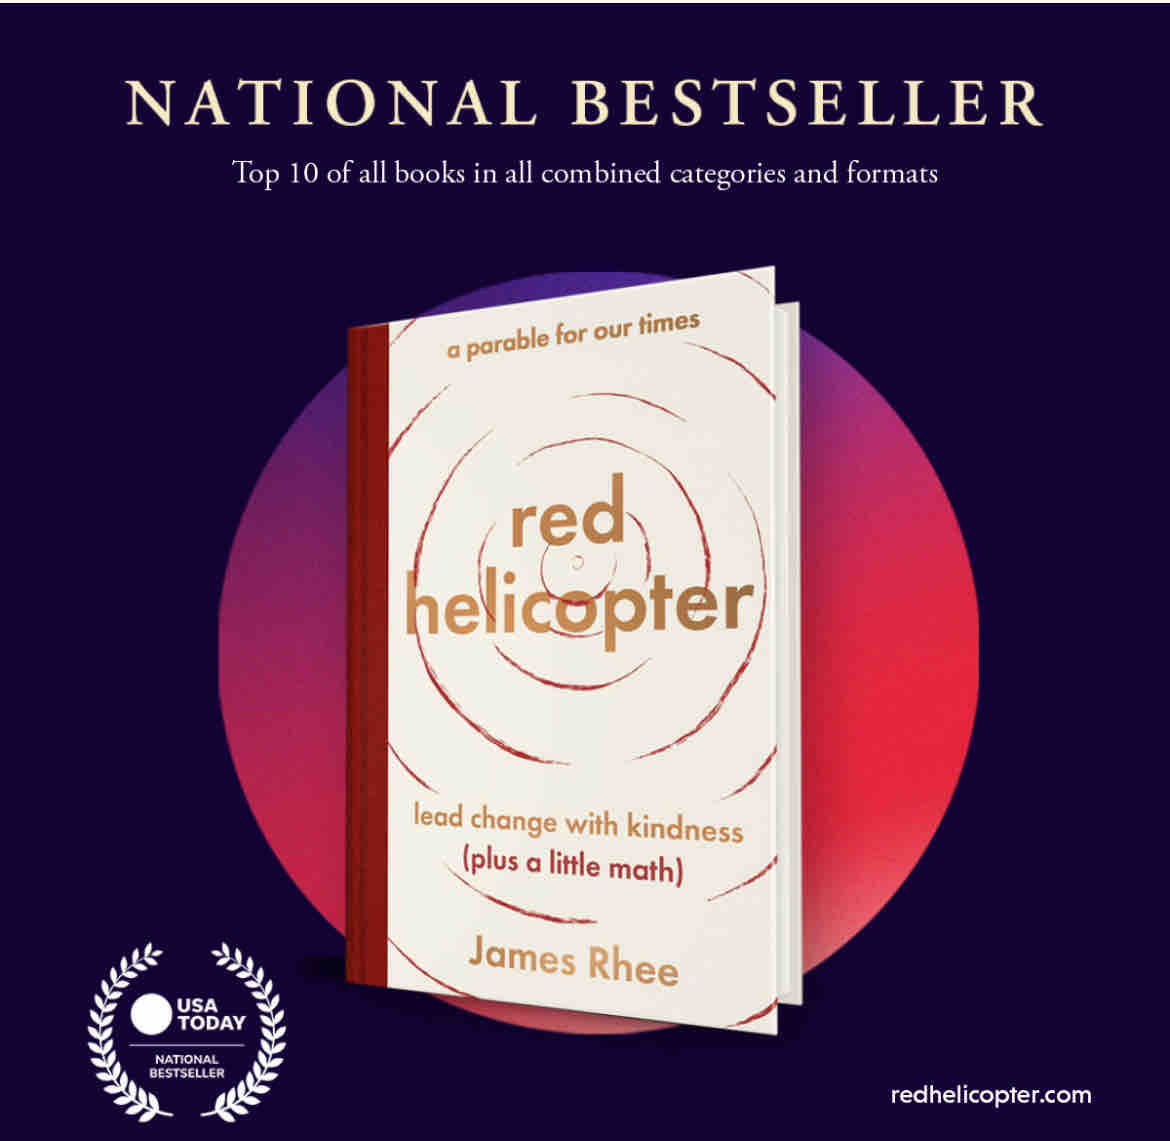 Congratulations to our friend @iamjamesrhee on his book making #7 on USA TODAY Top 10! . Meet him this September @2024SBDC in Atlanta. #redhelicopter #kindness